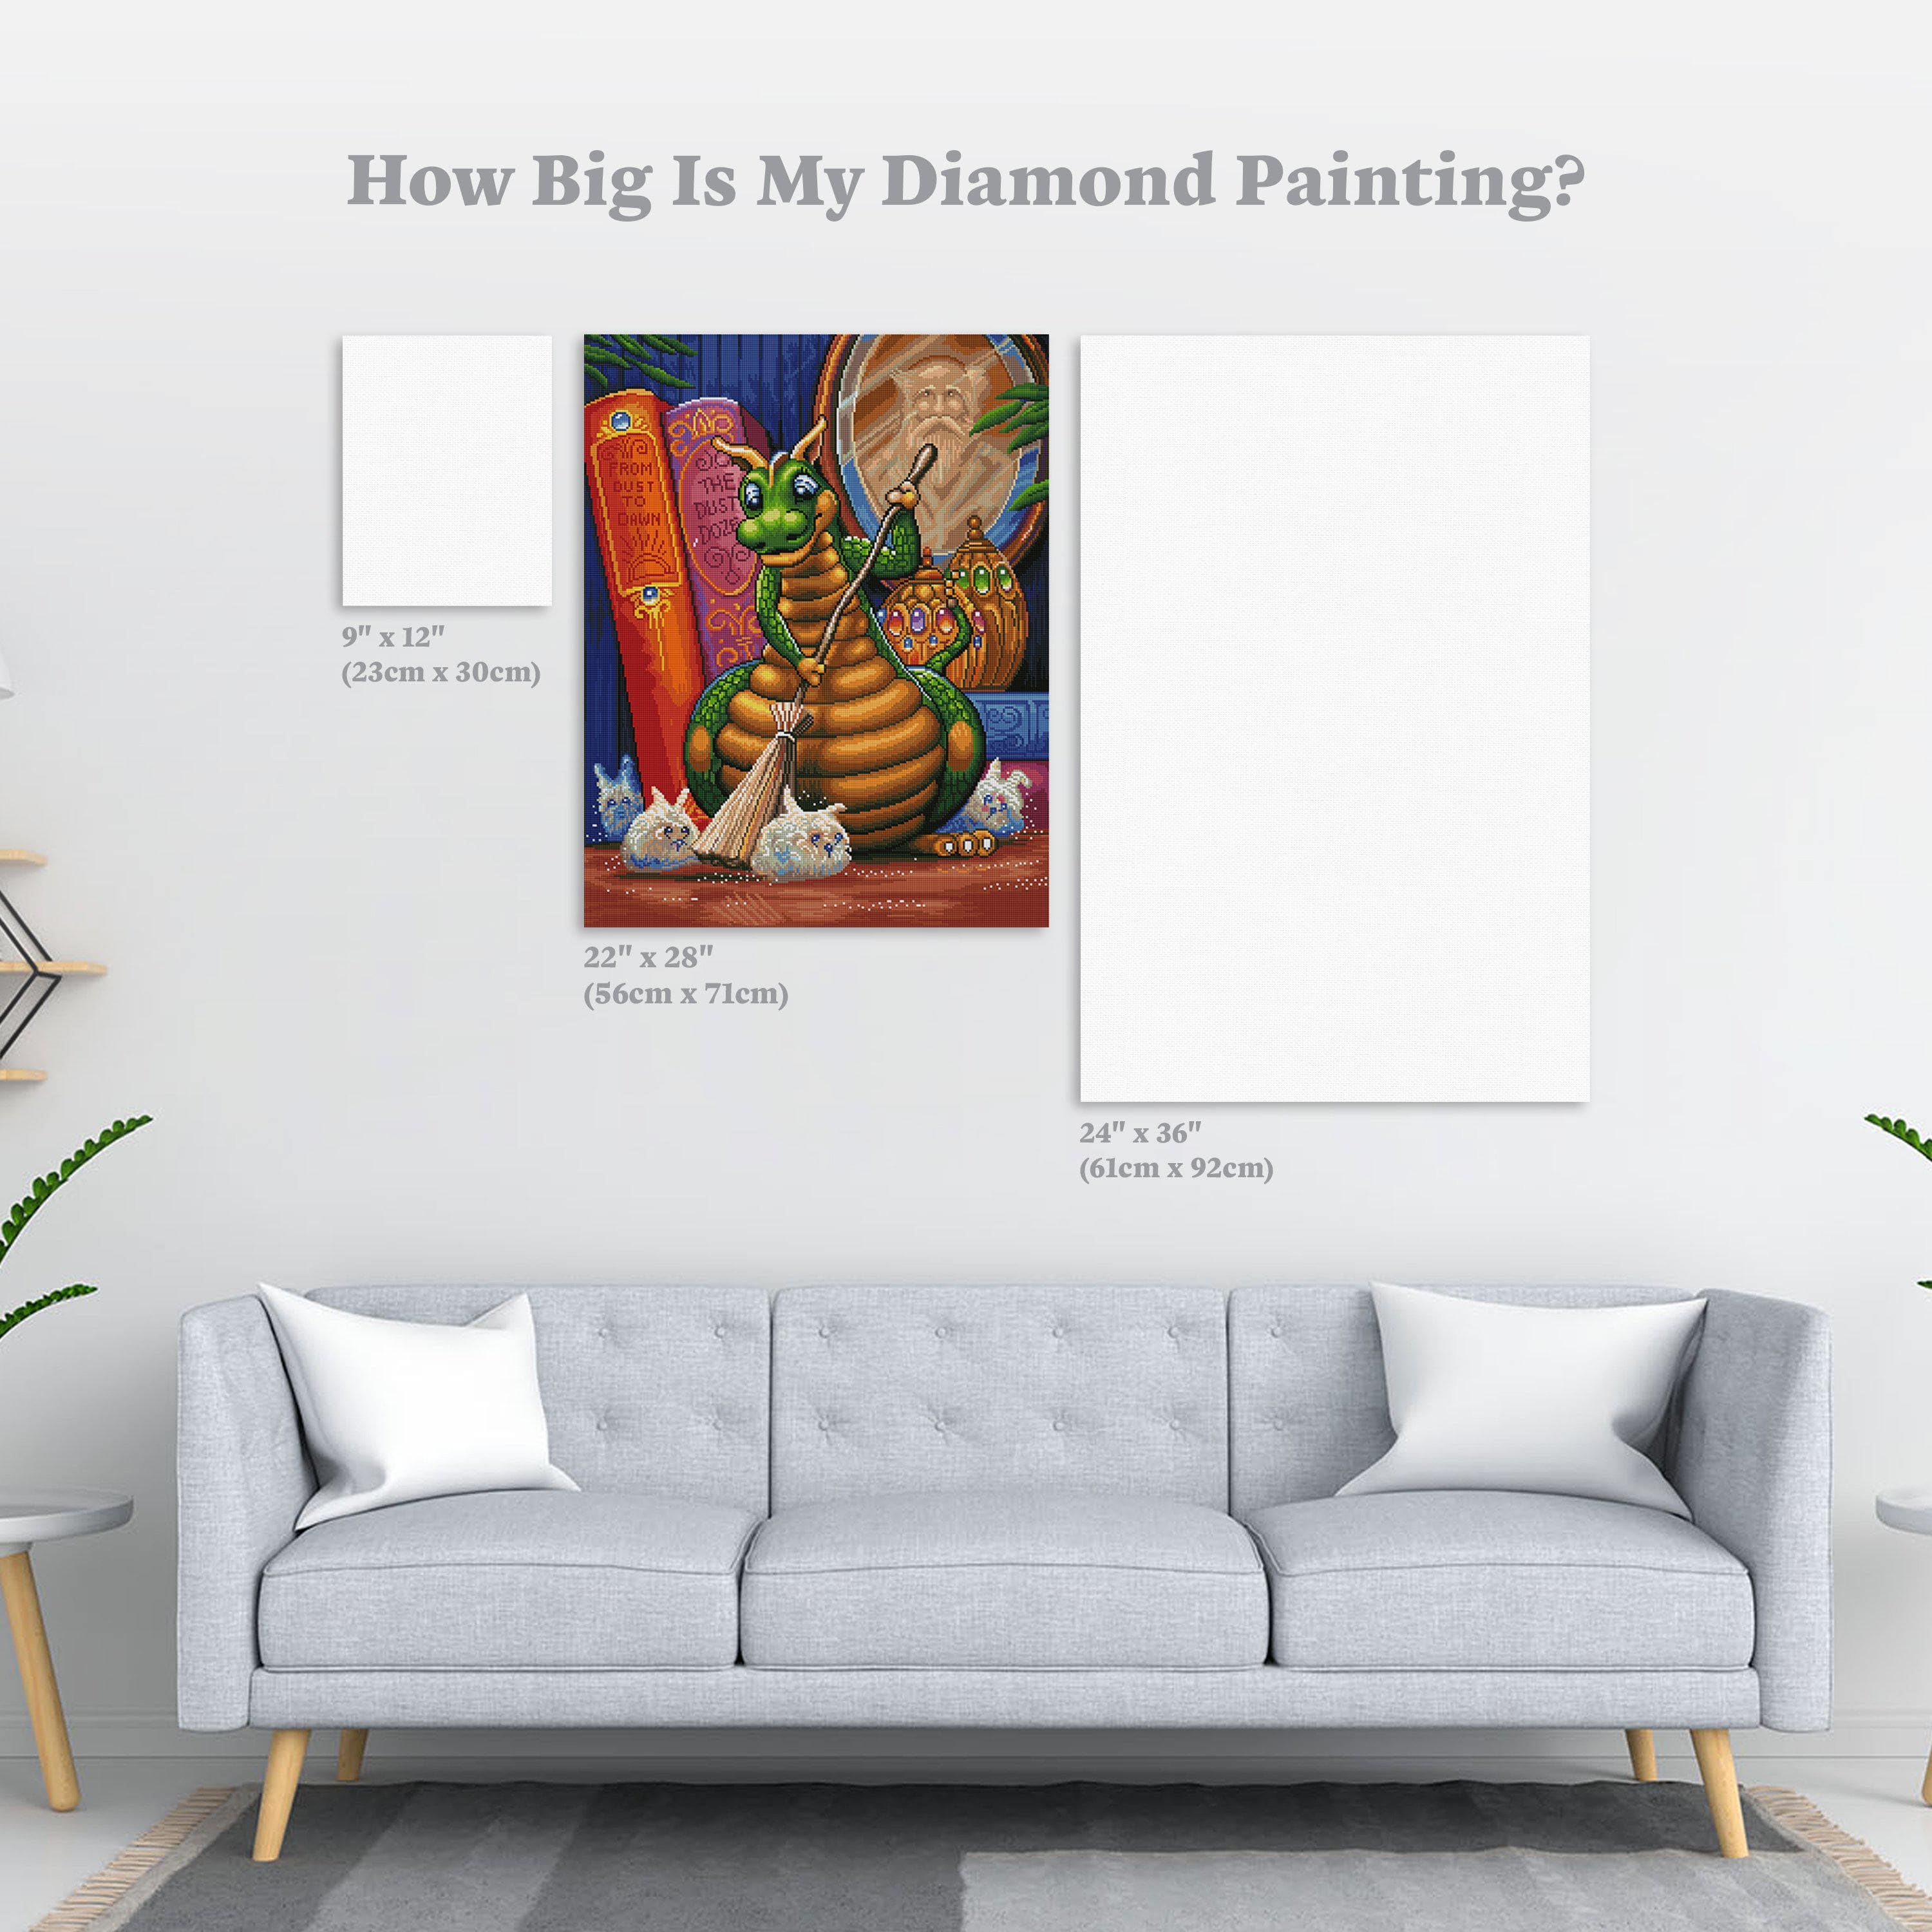 Did anyone tried easel for diamond painting? : r/diamondpainting